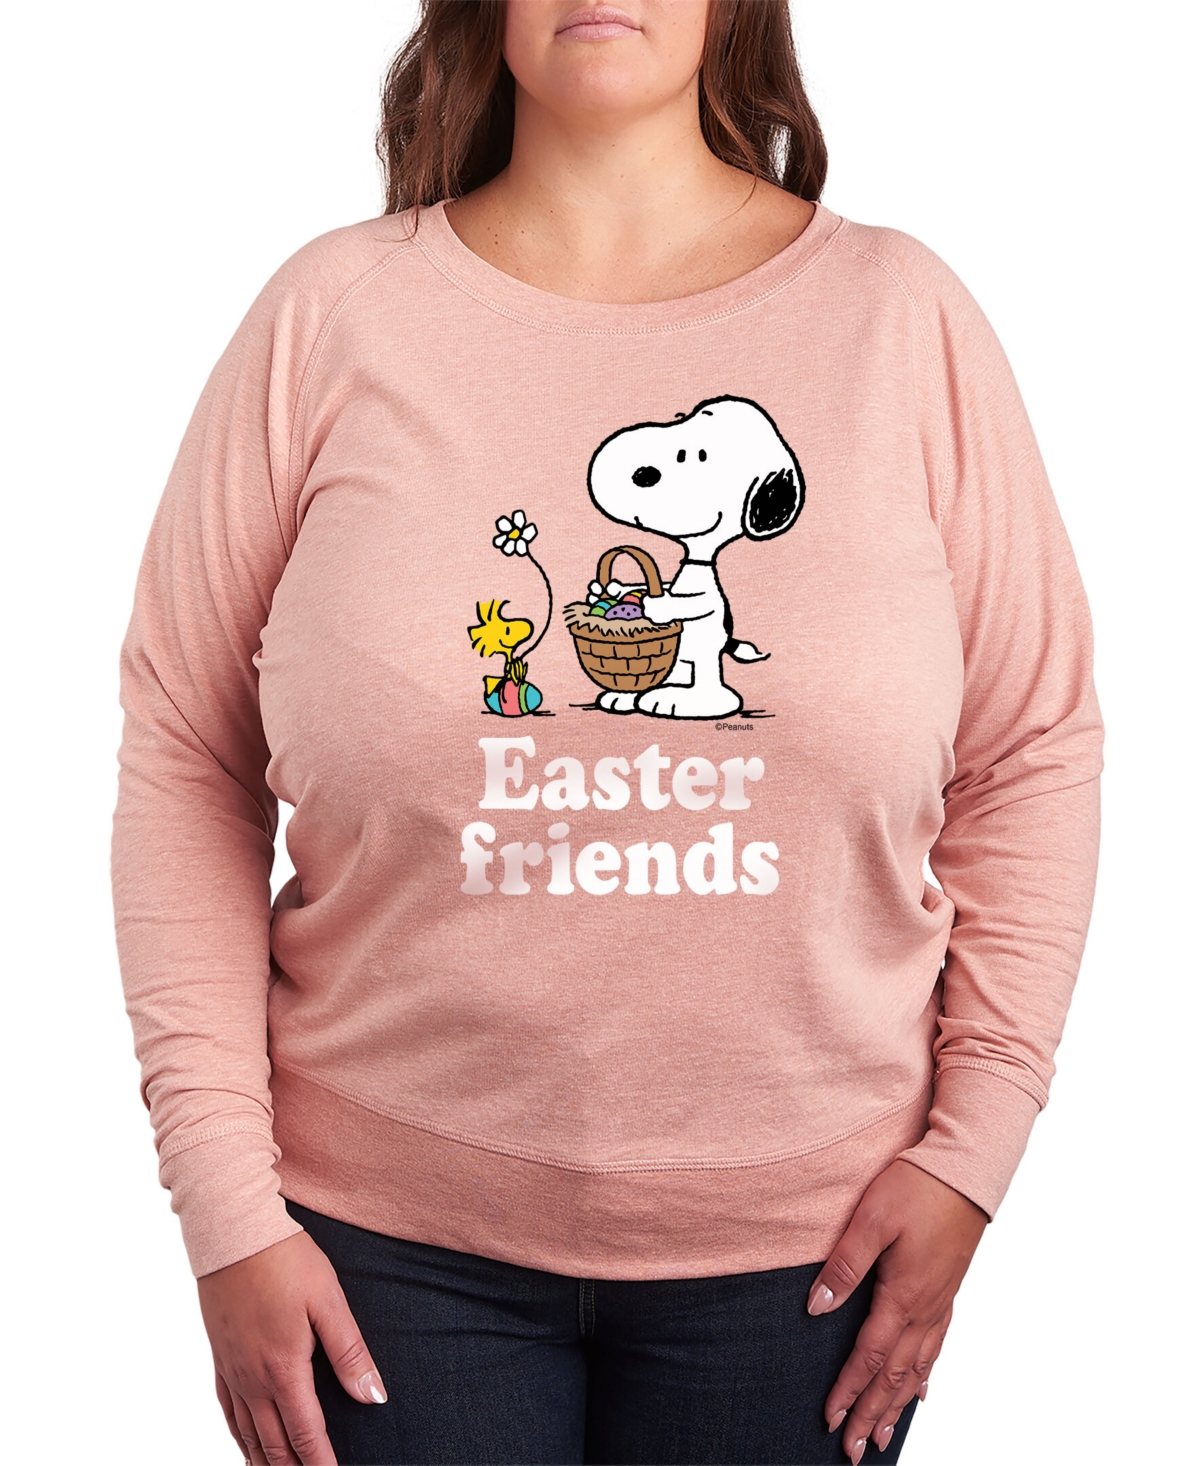 AIR WAVES TRENDY PLUS SIZE PEANUTS EASTER FRIENDS LONG SLEEVE PULLOVER TOP